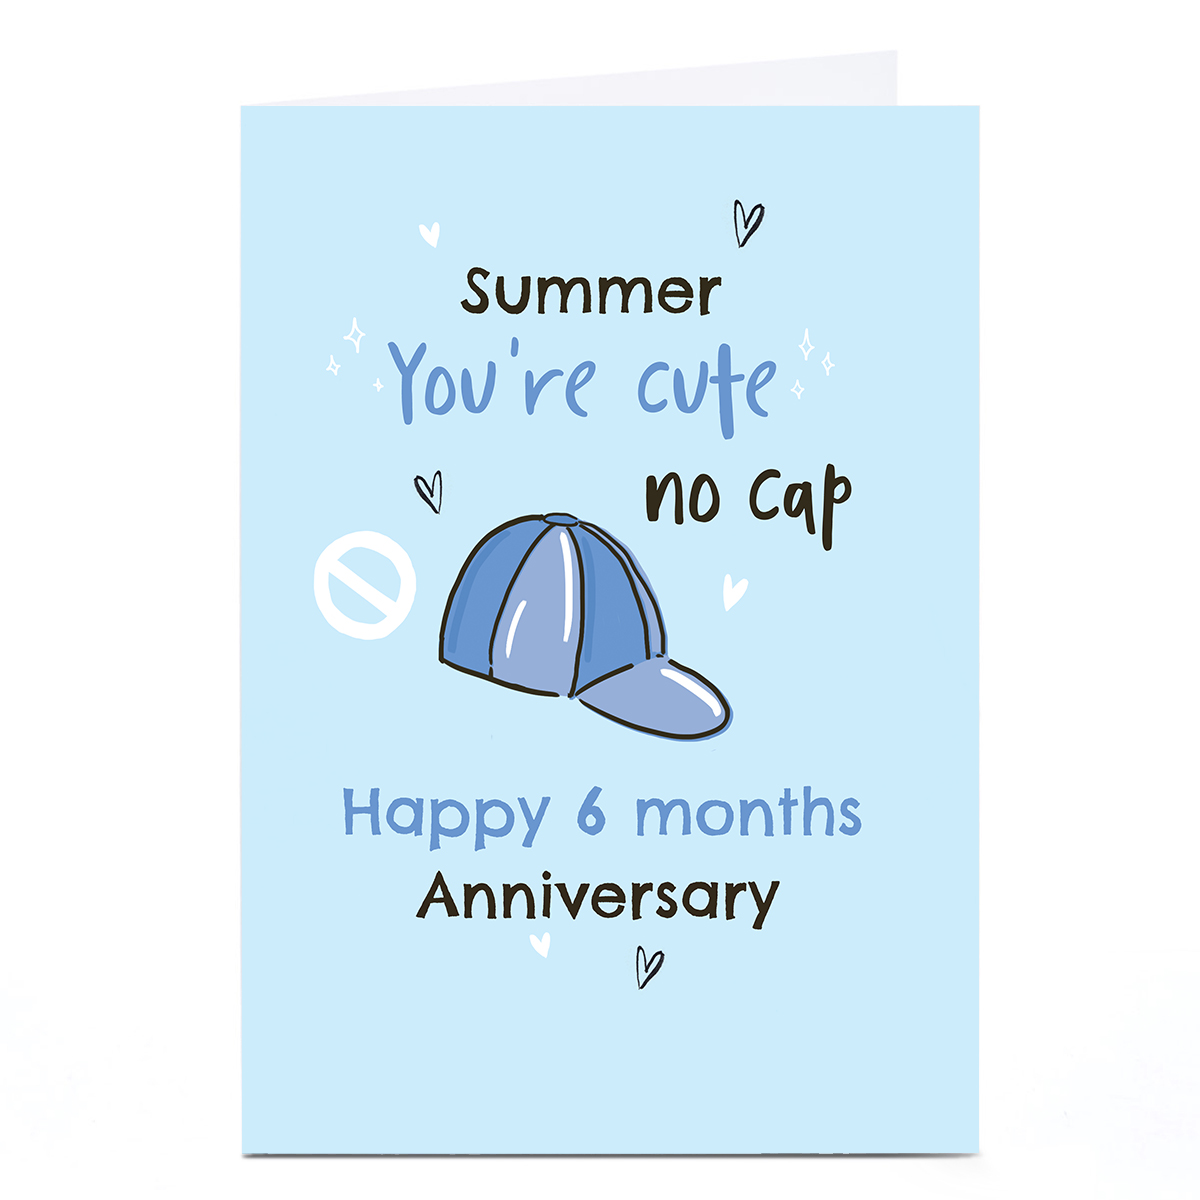 Personalised Anniversary Card - You're Cute No Cap